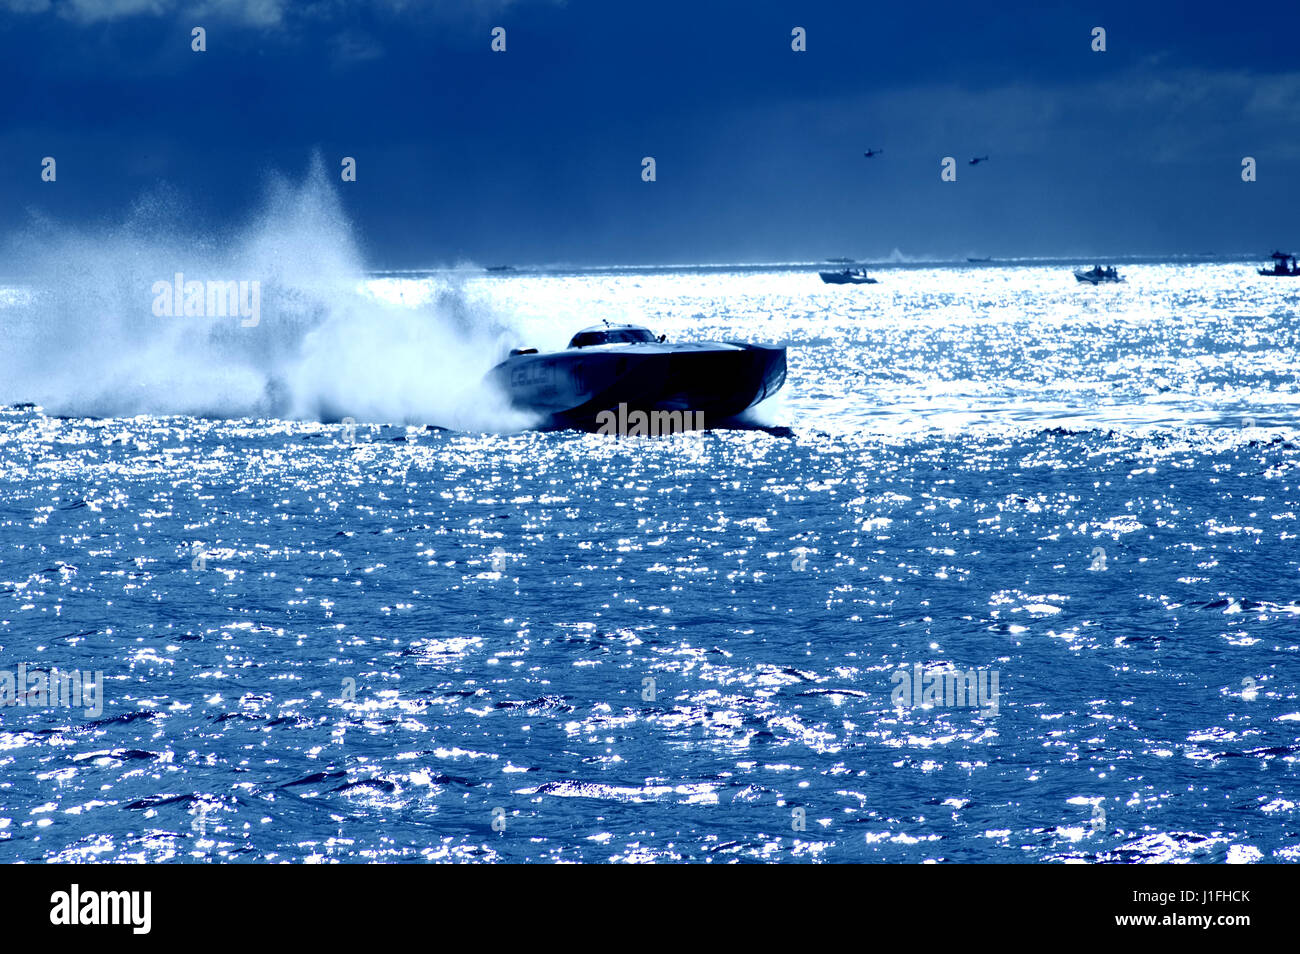 off shore power boat racing Stock Photo